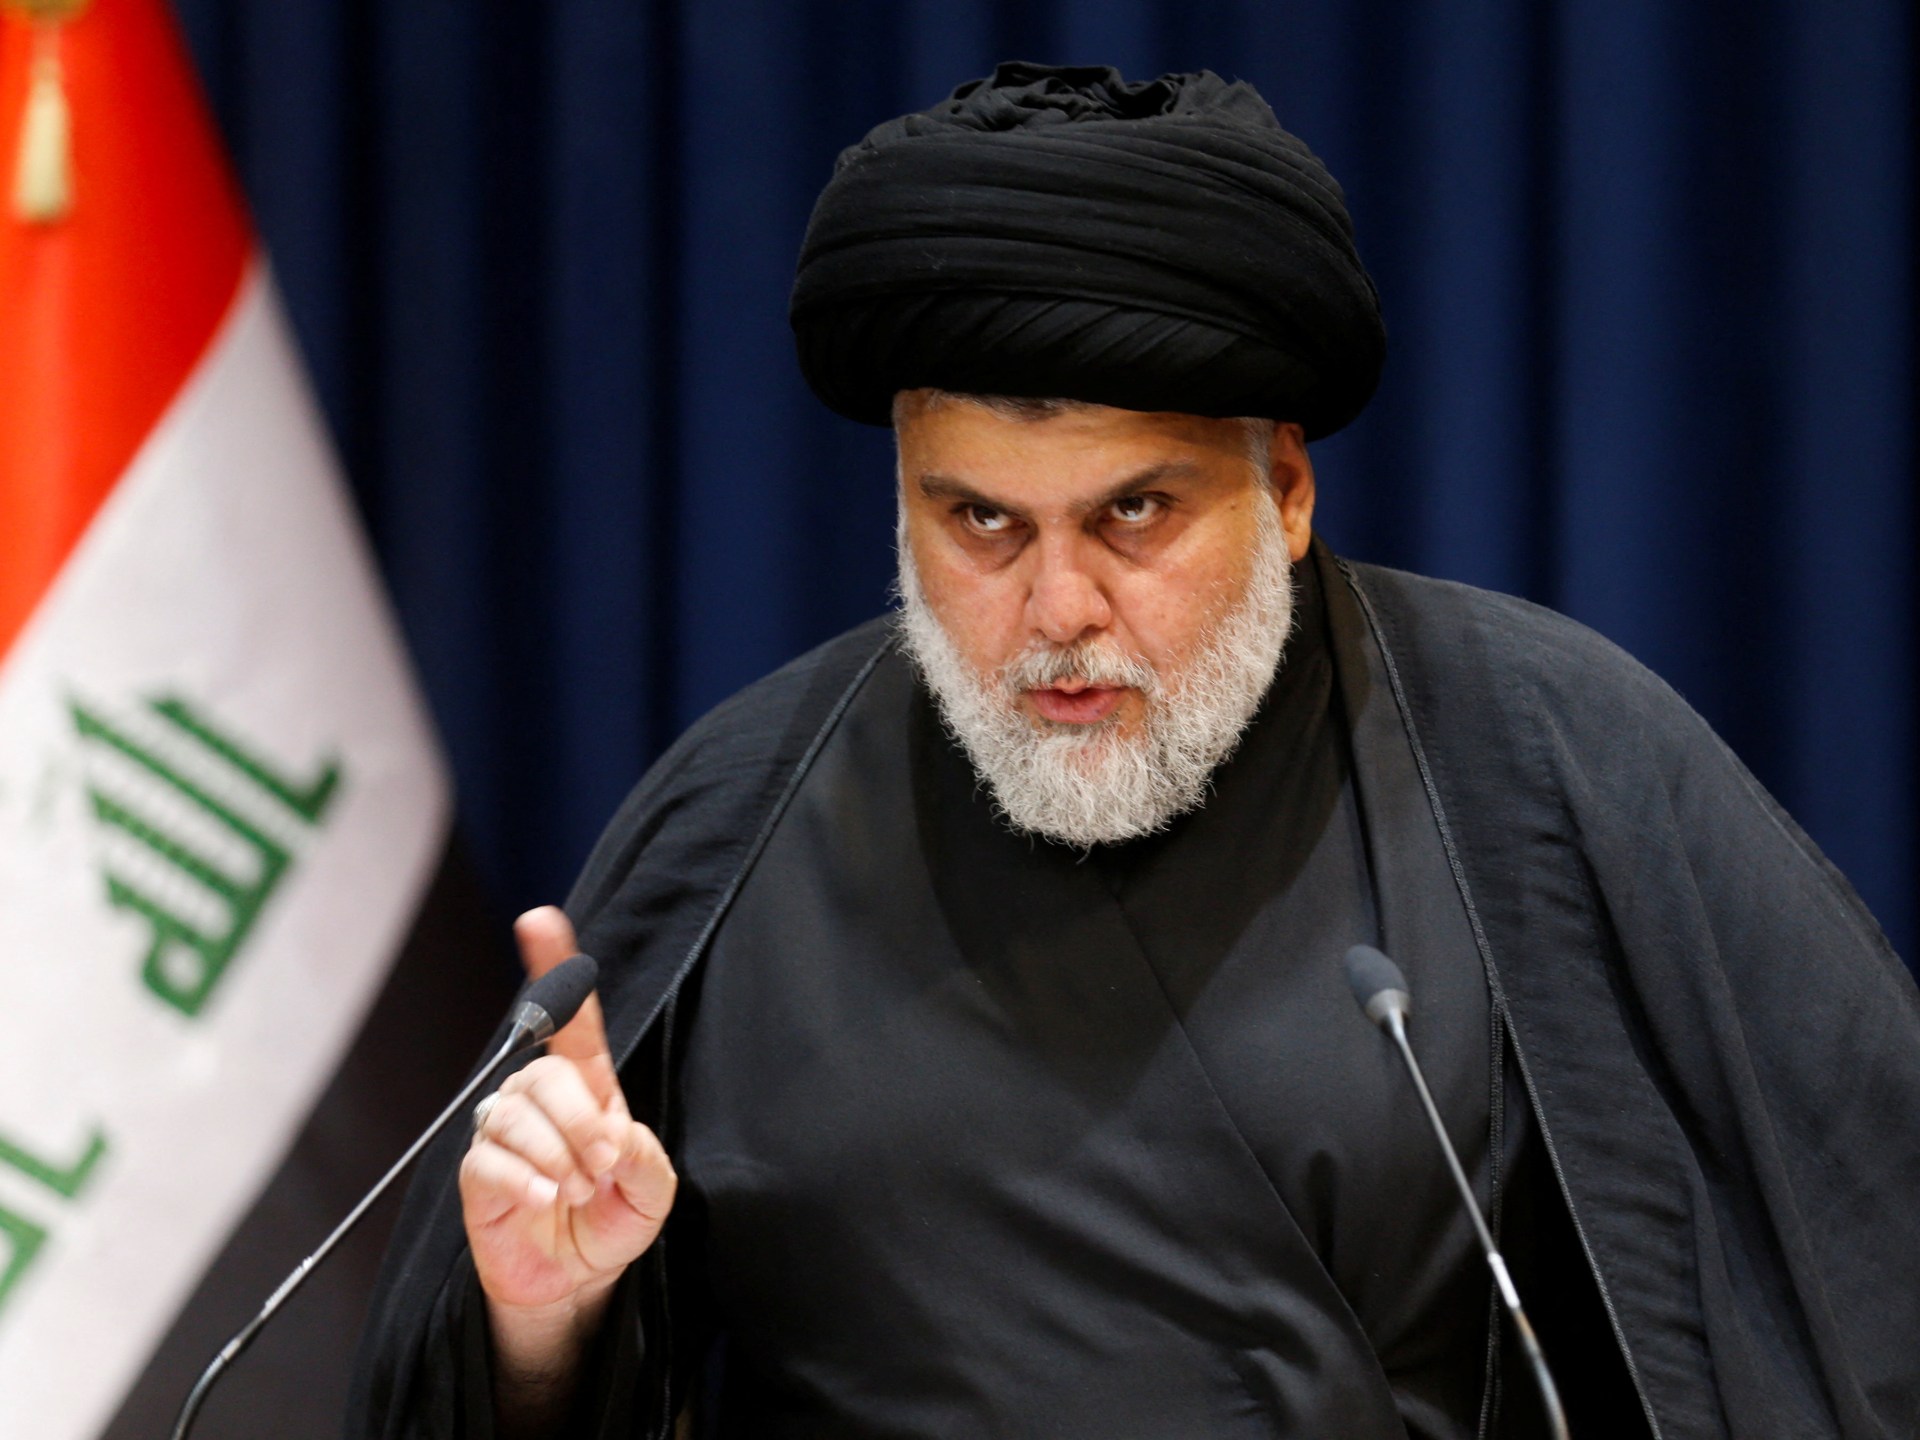 Al-Sadr ‘withdraws’ from Iraqi politics after months of tensions